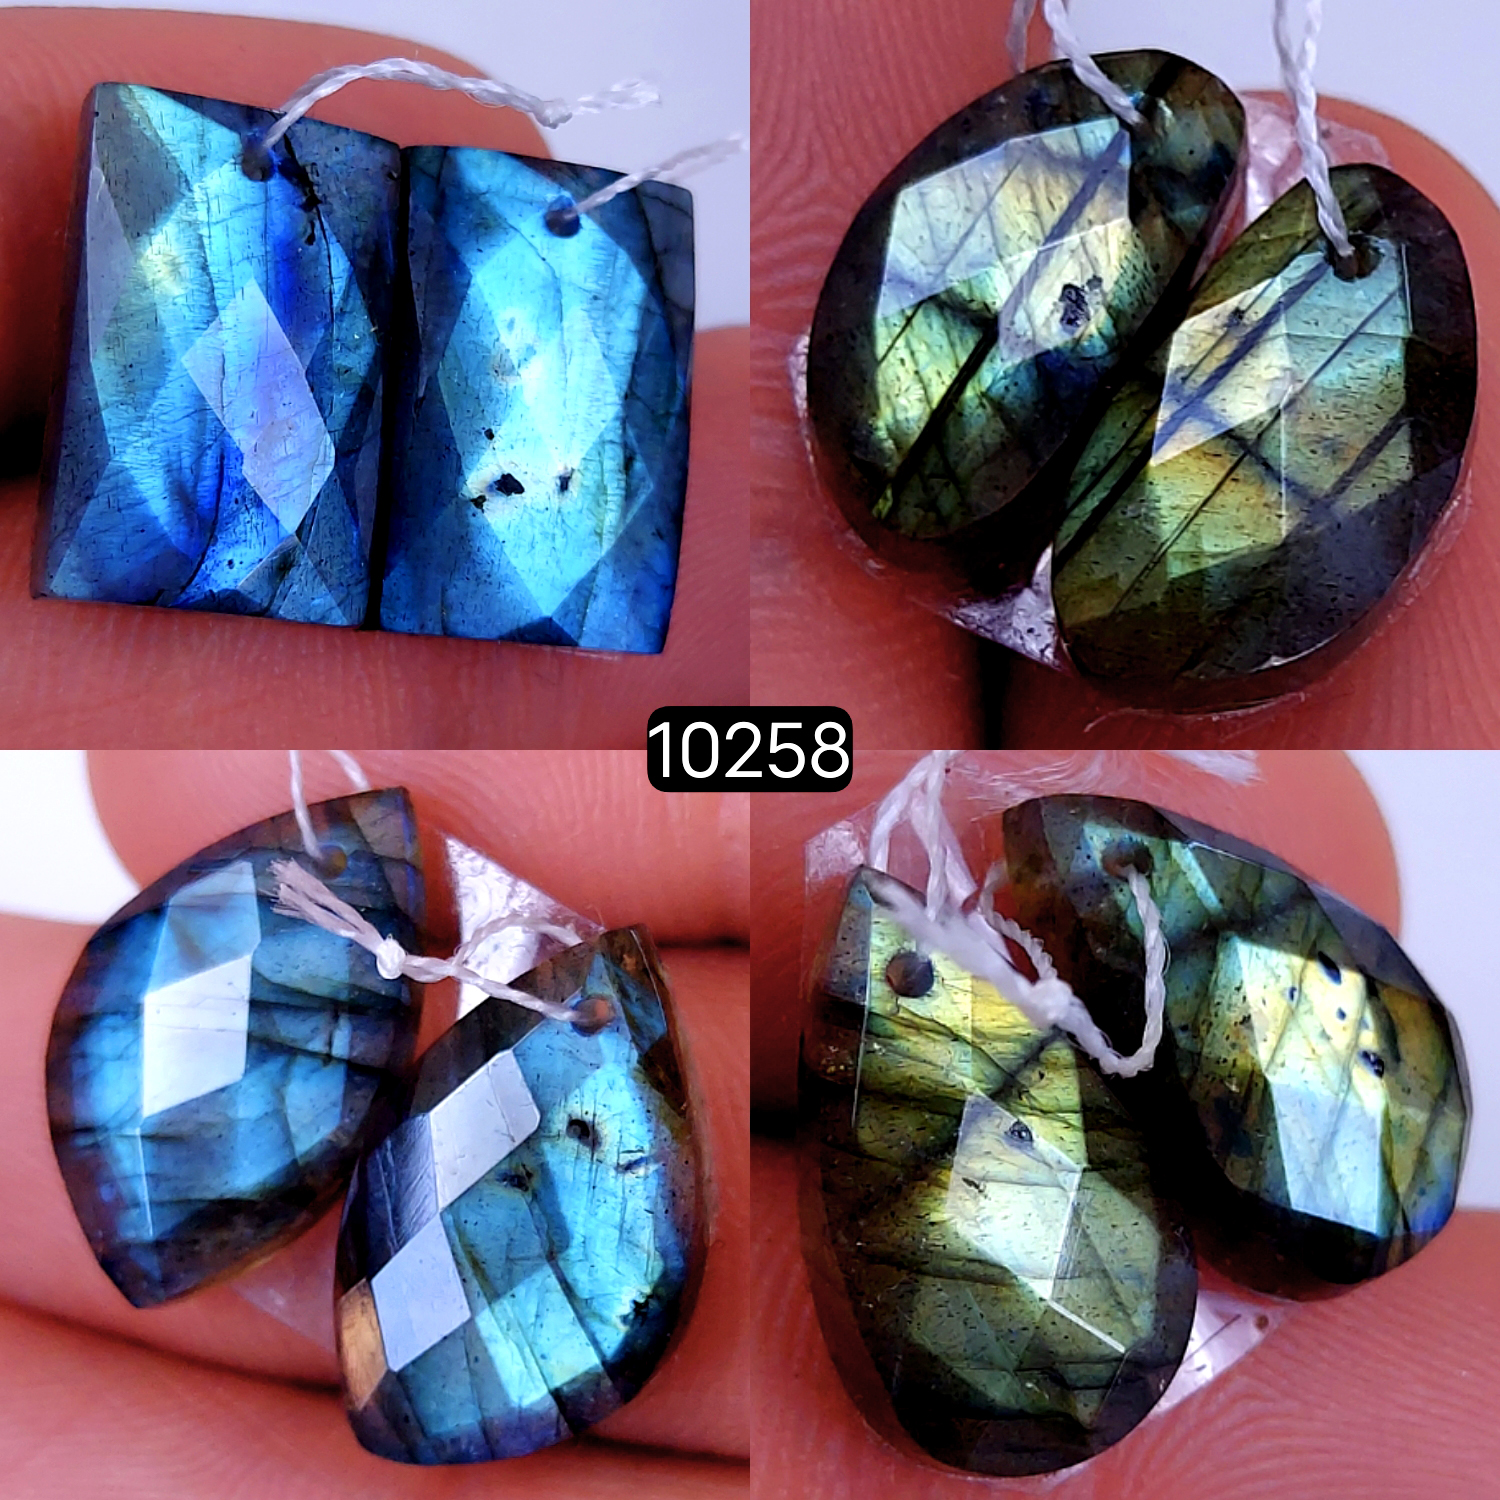 4Pair 62Cts Natural Labradorite Faceted Crystal Drill Dangle Drop Earring Pairs Silver Earrings Rose cut Labradorite Hoop Jewelry  17x11 14x8mm #10258